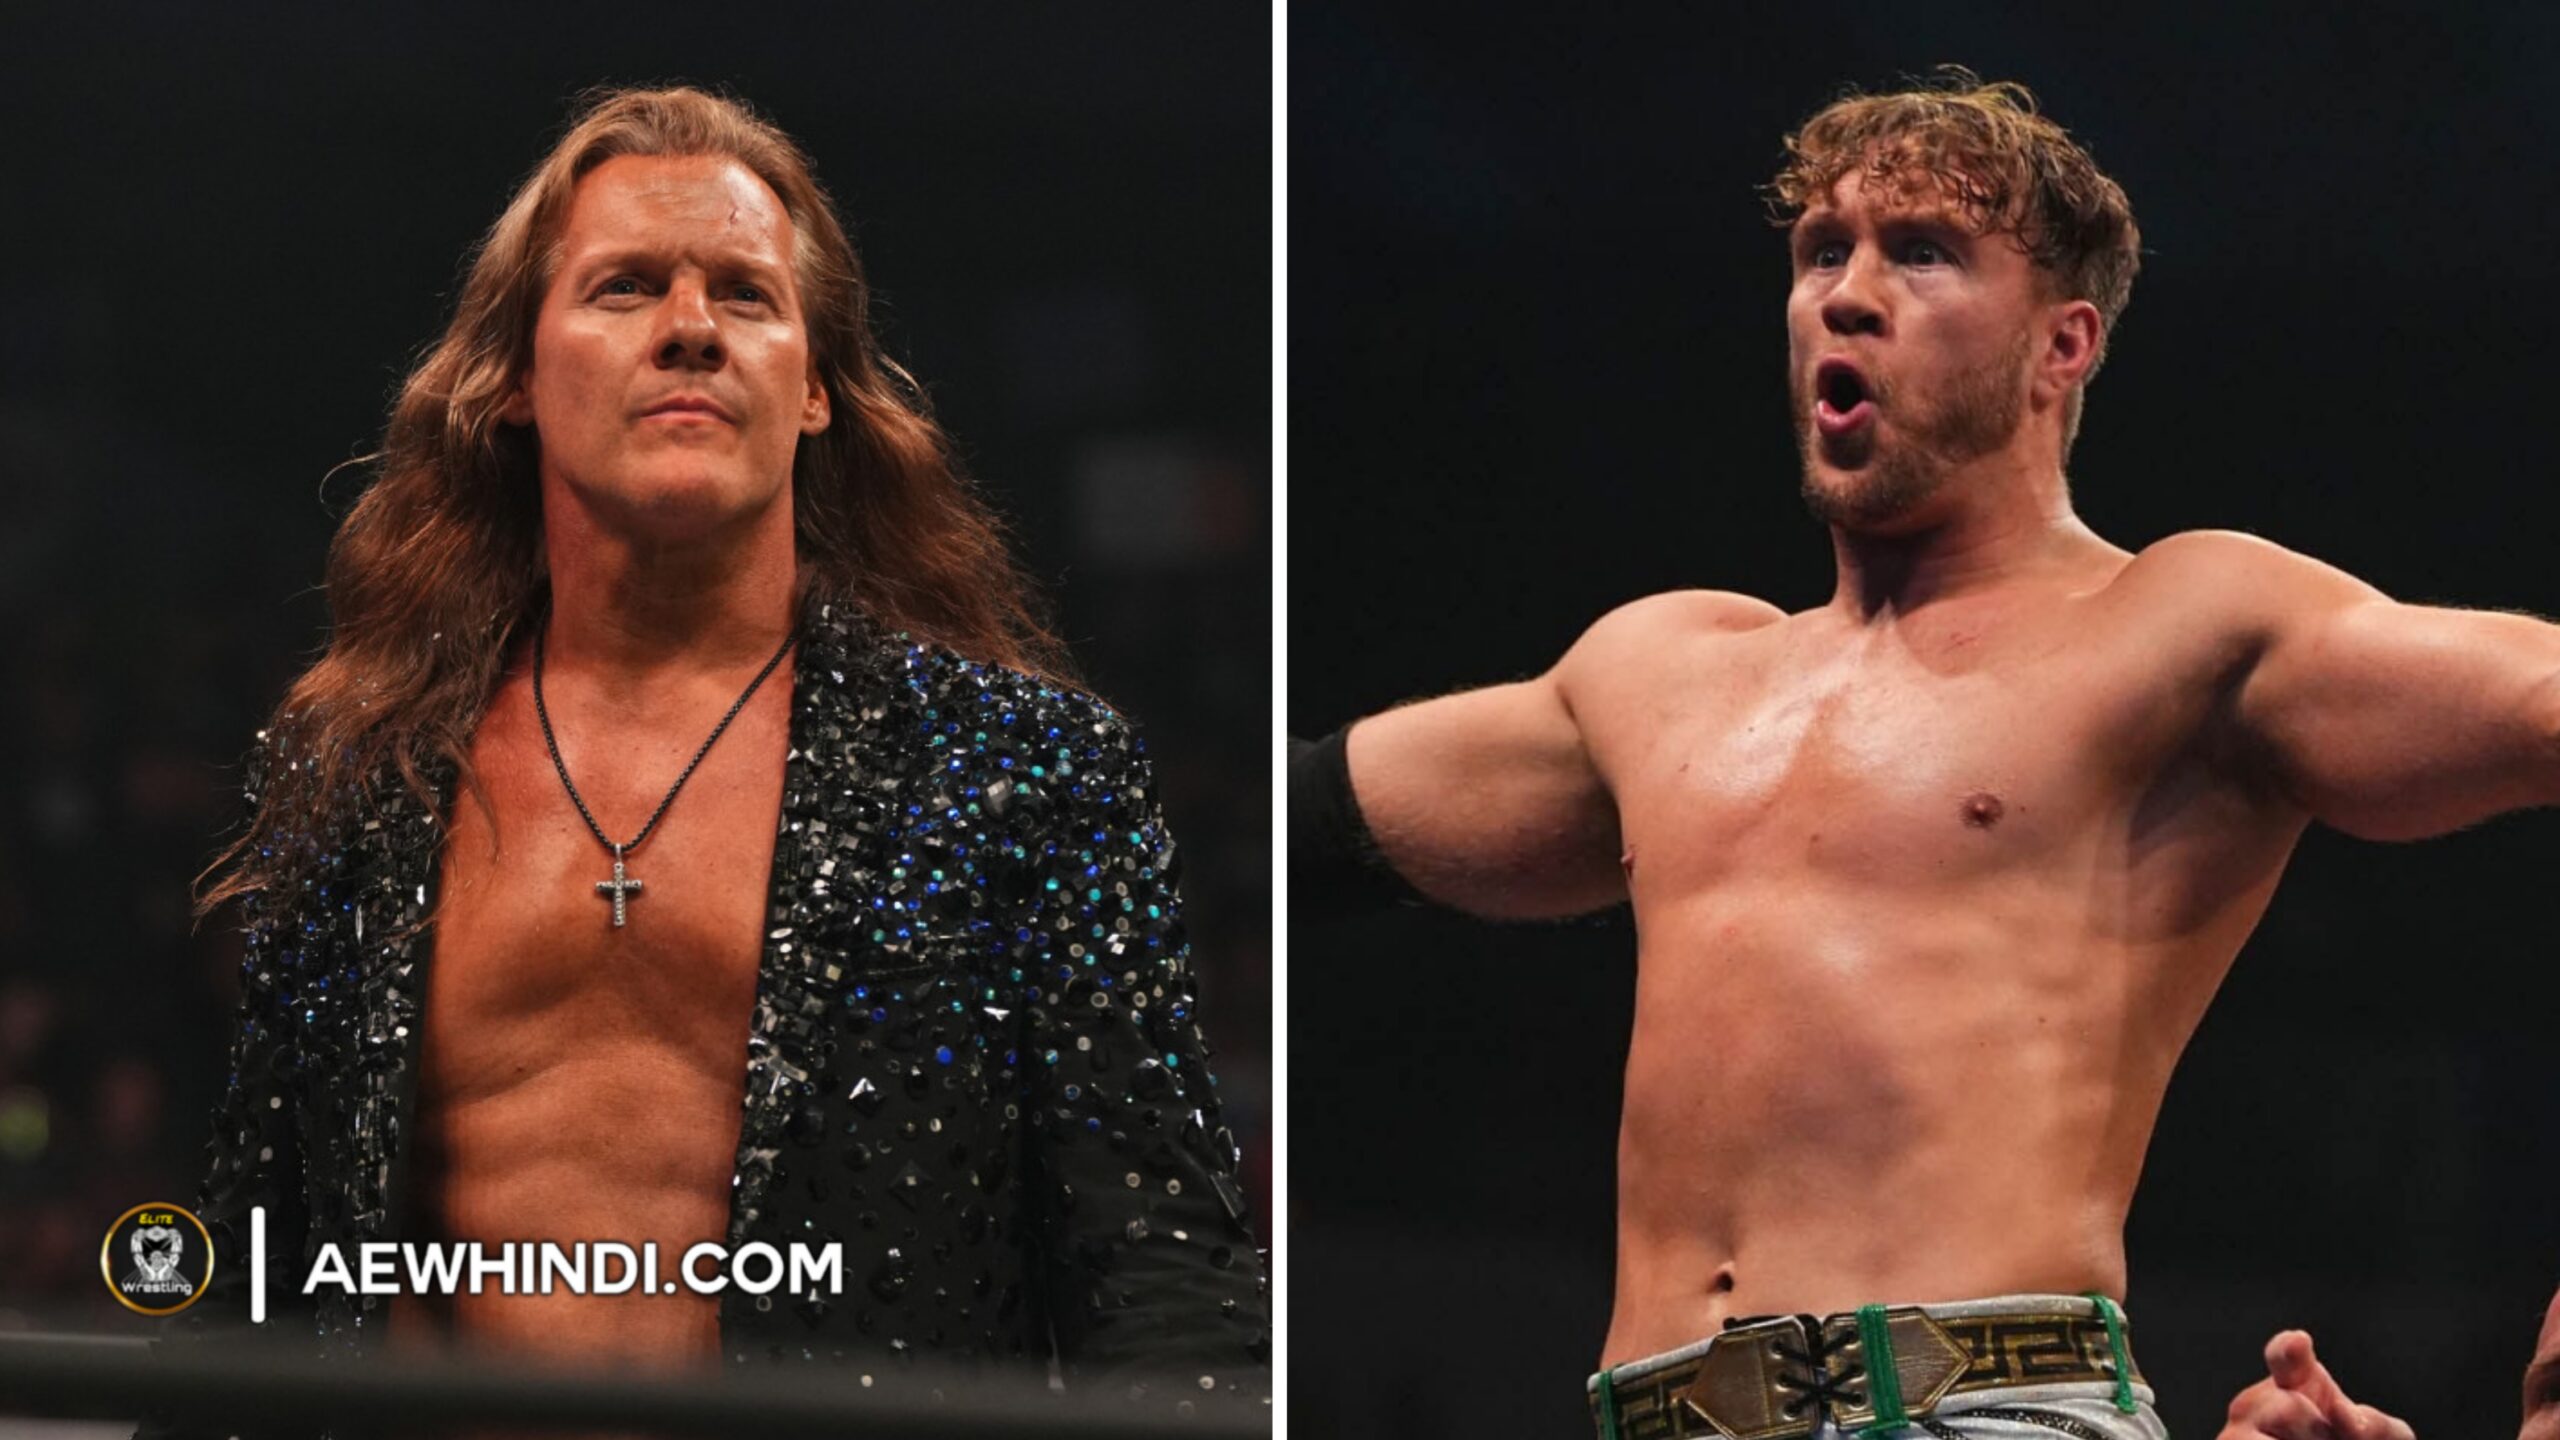 Will Ospreay Vs Chris Jericho at AEW All In